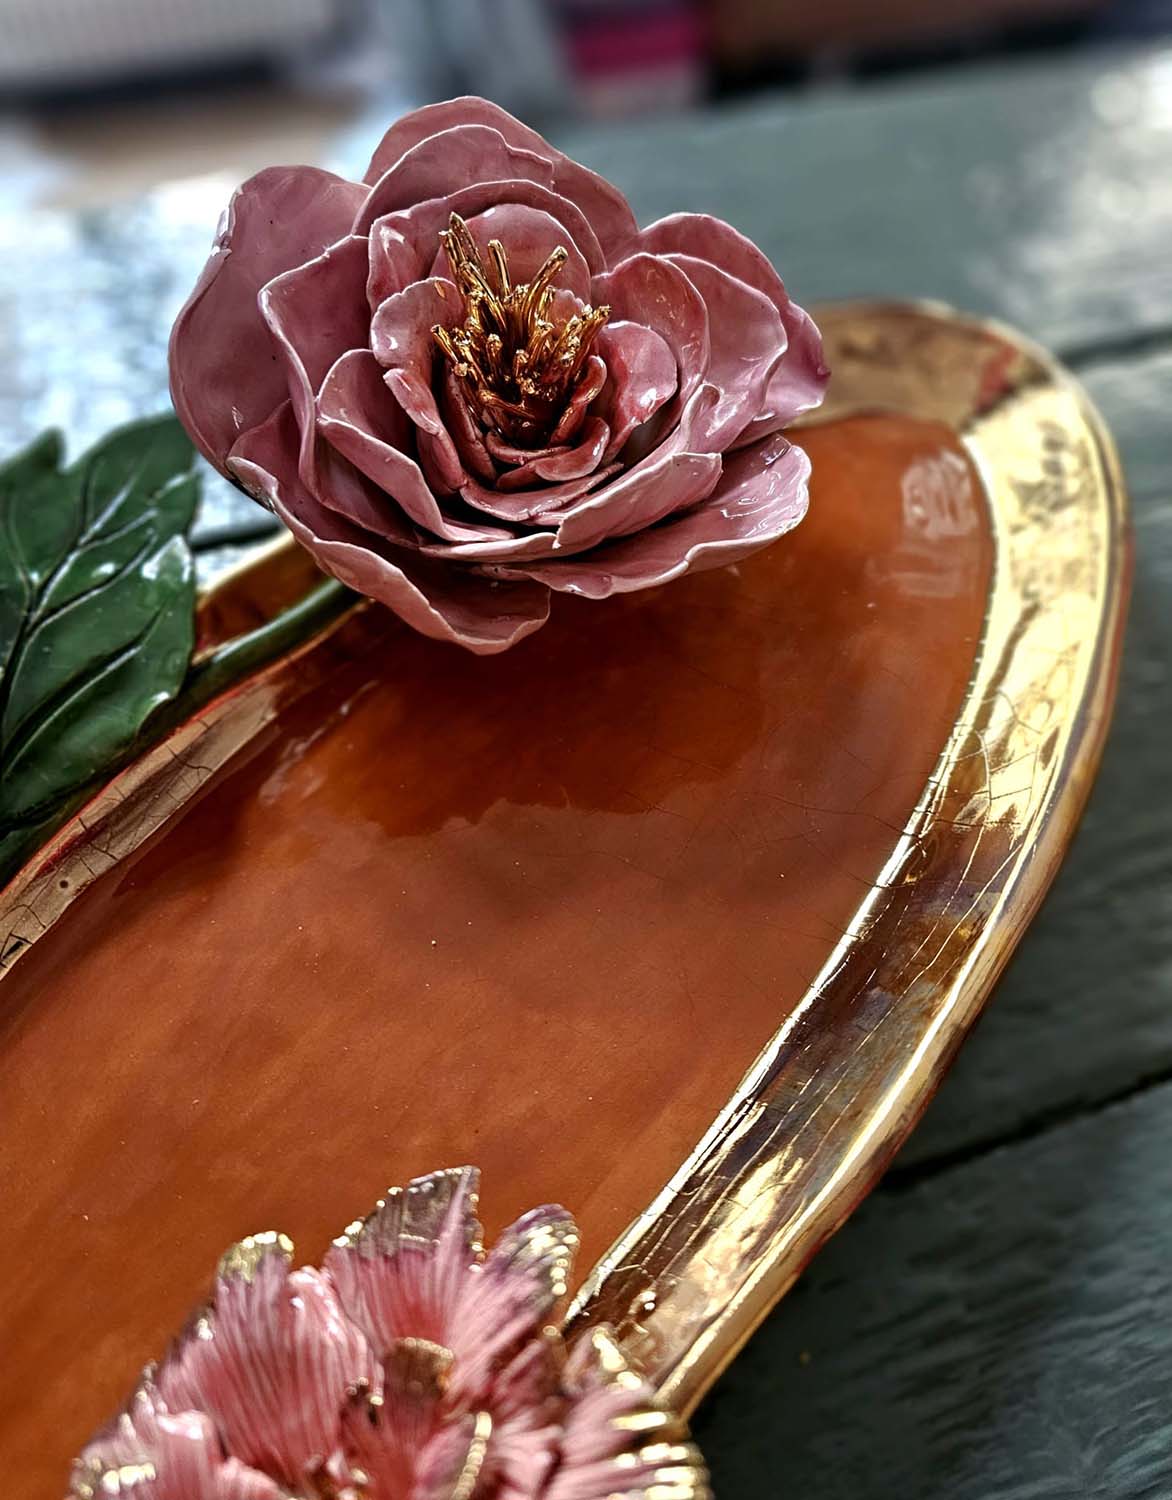 Enamelled earthenware dish gilded with fine 22-carat gold